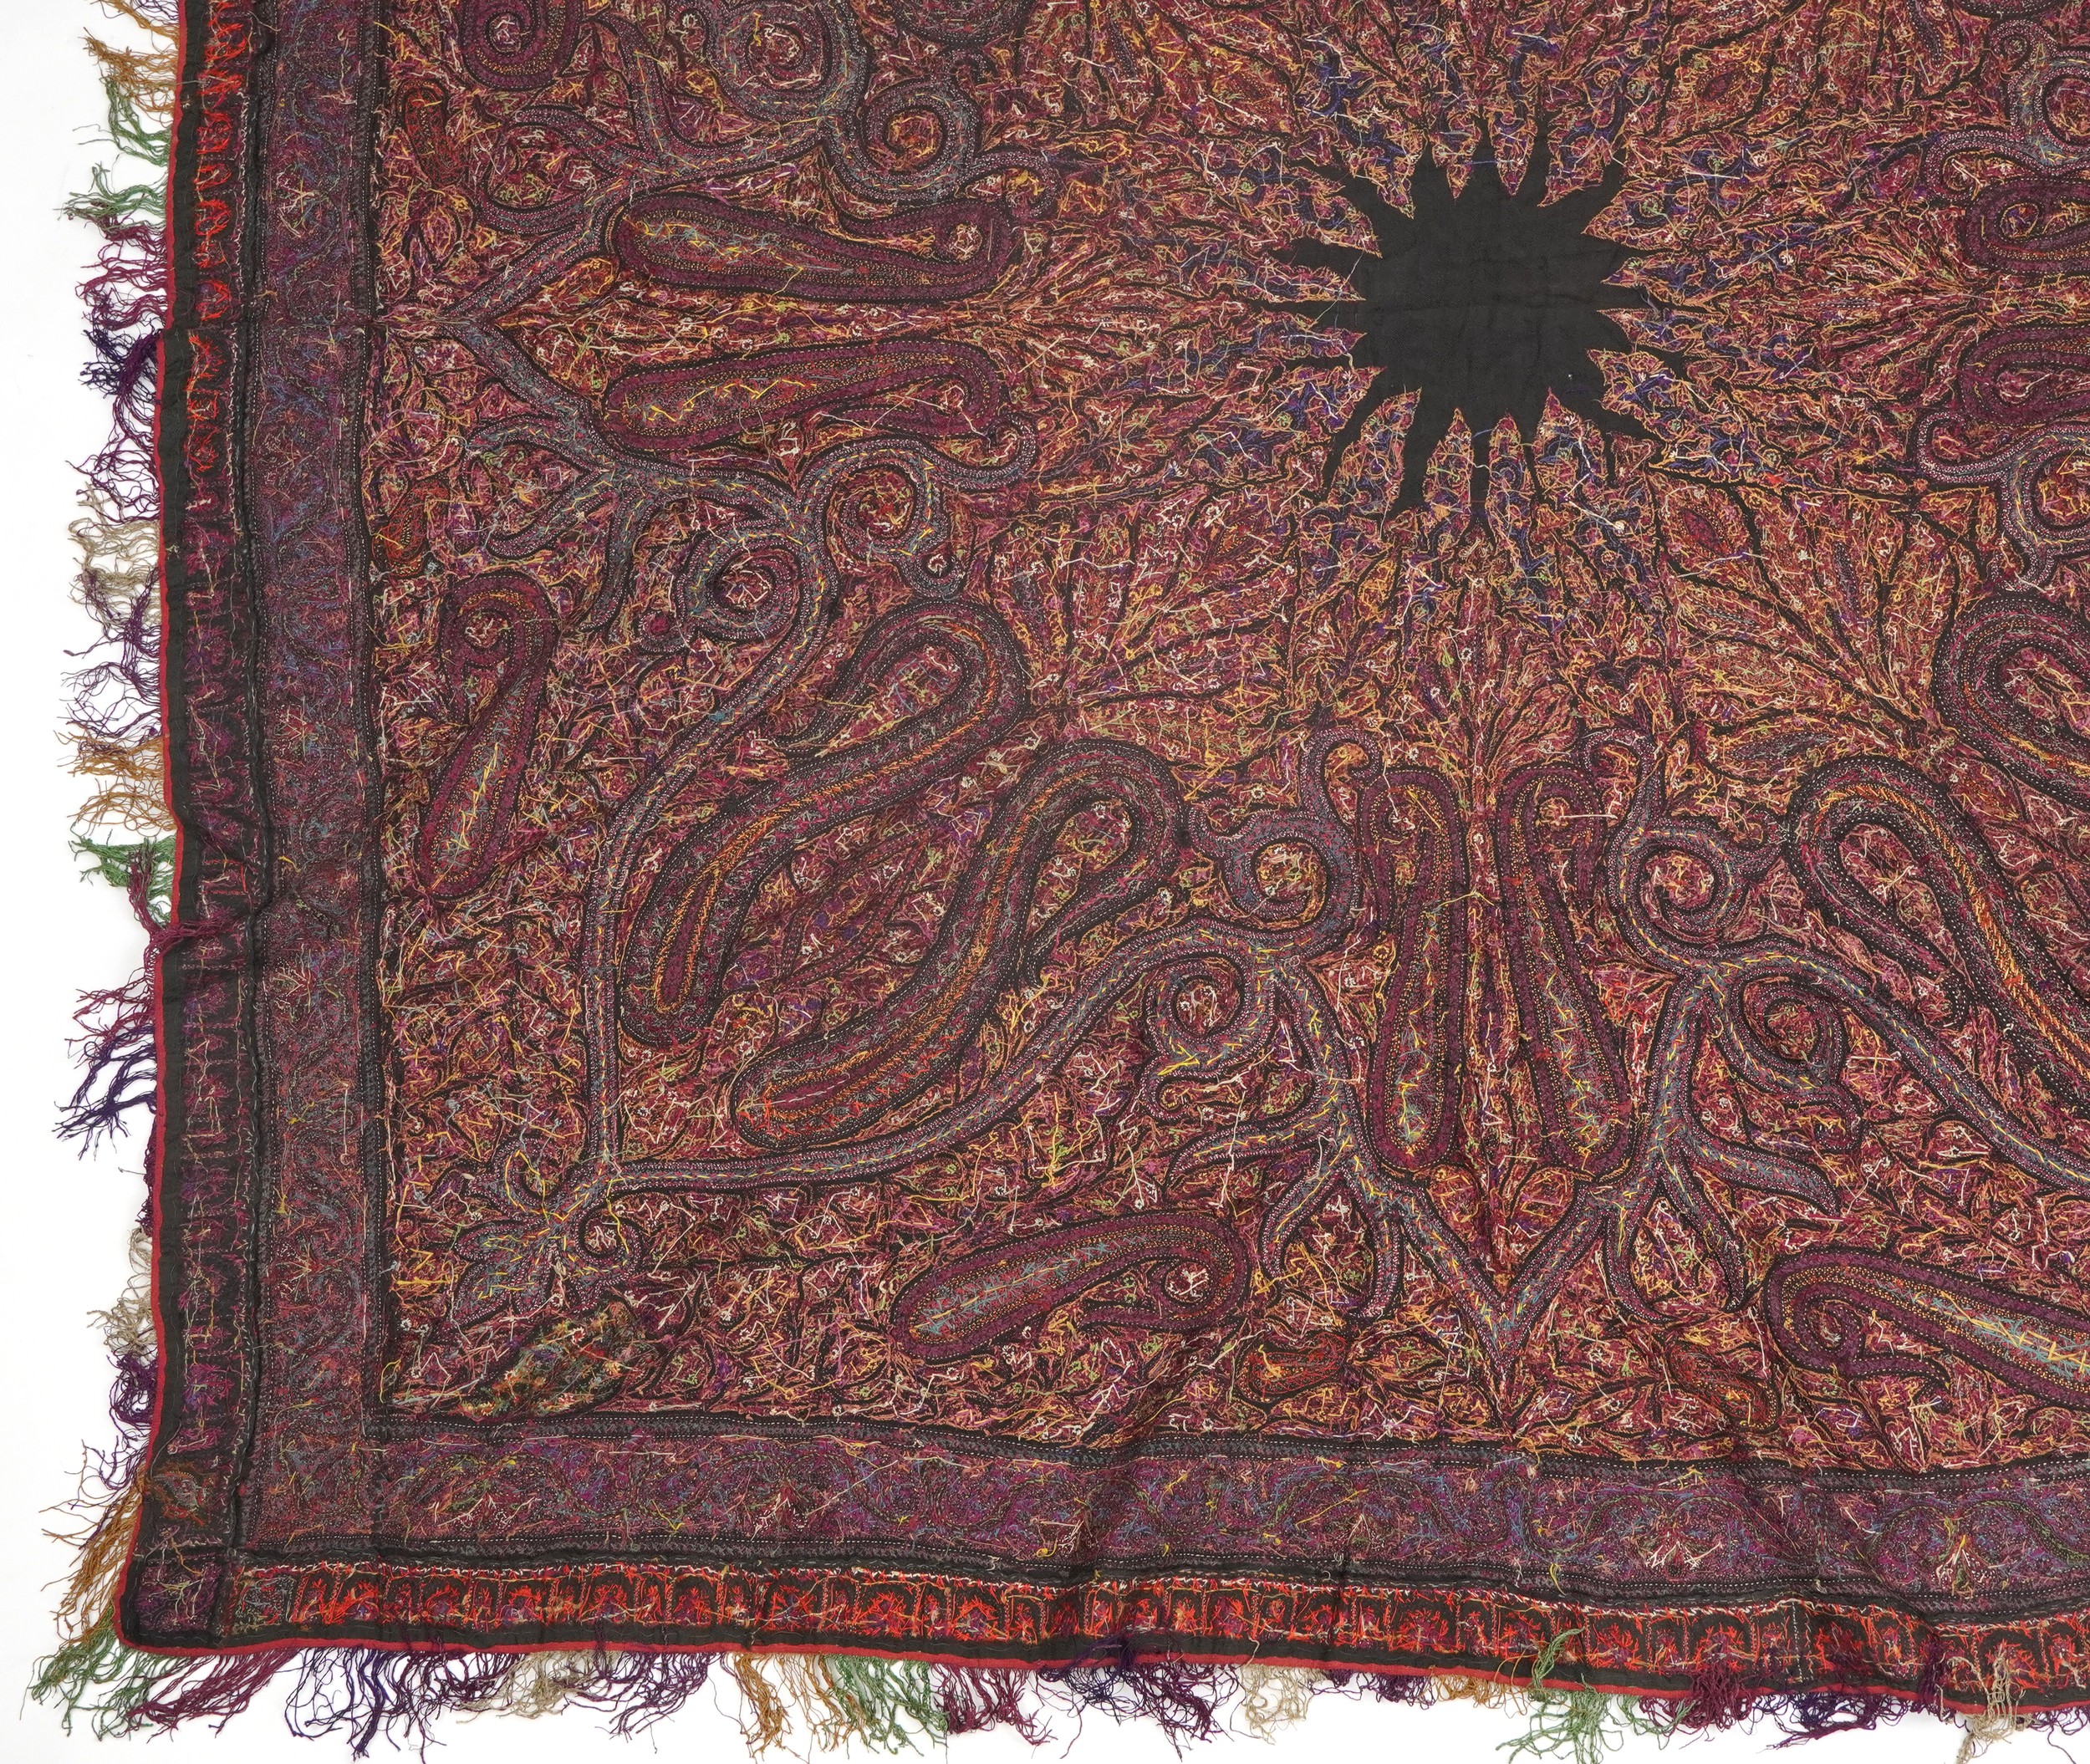 19th century Indian Kashmir/cashmere textile or shawl, 170cm x 170cm : For further information on - Image 11 of 12